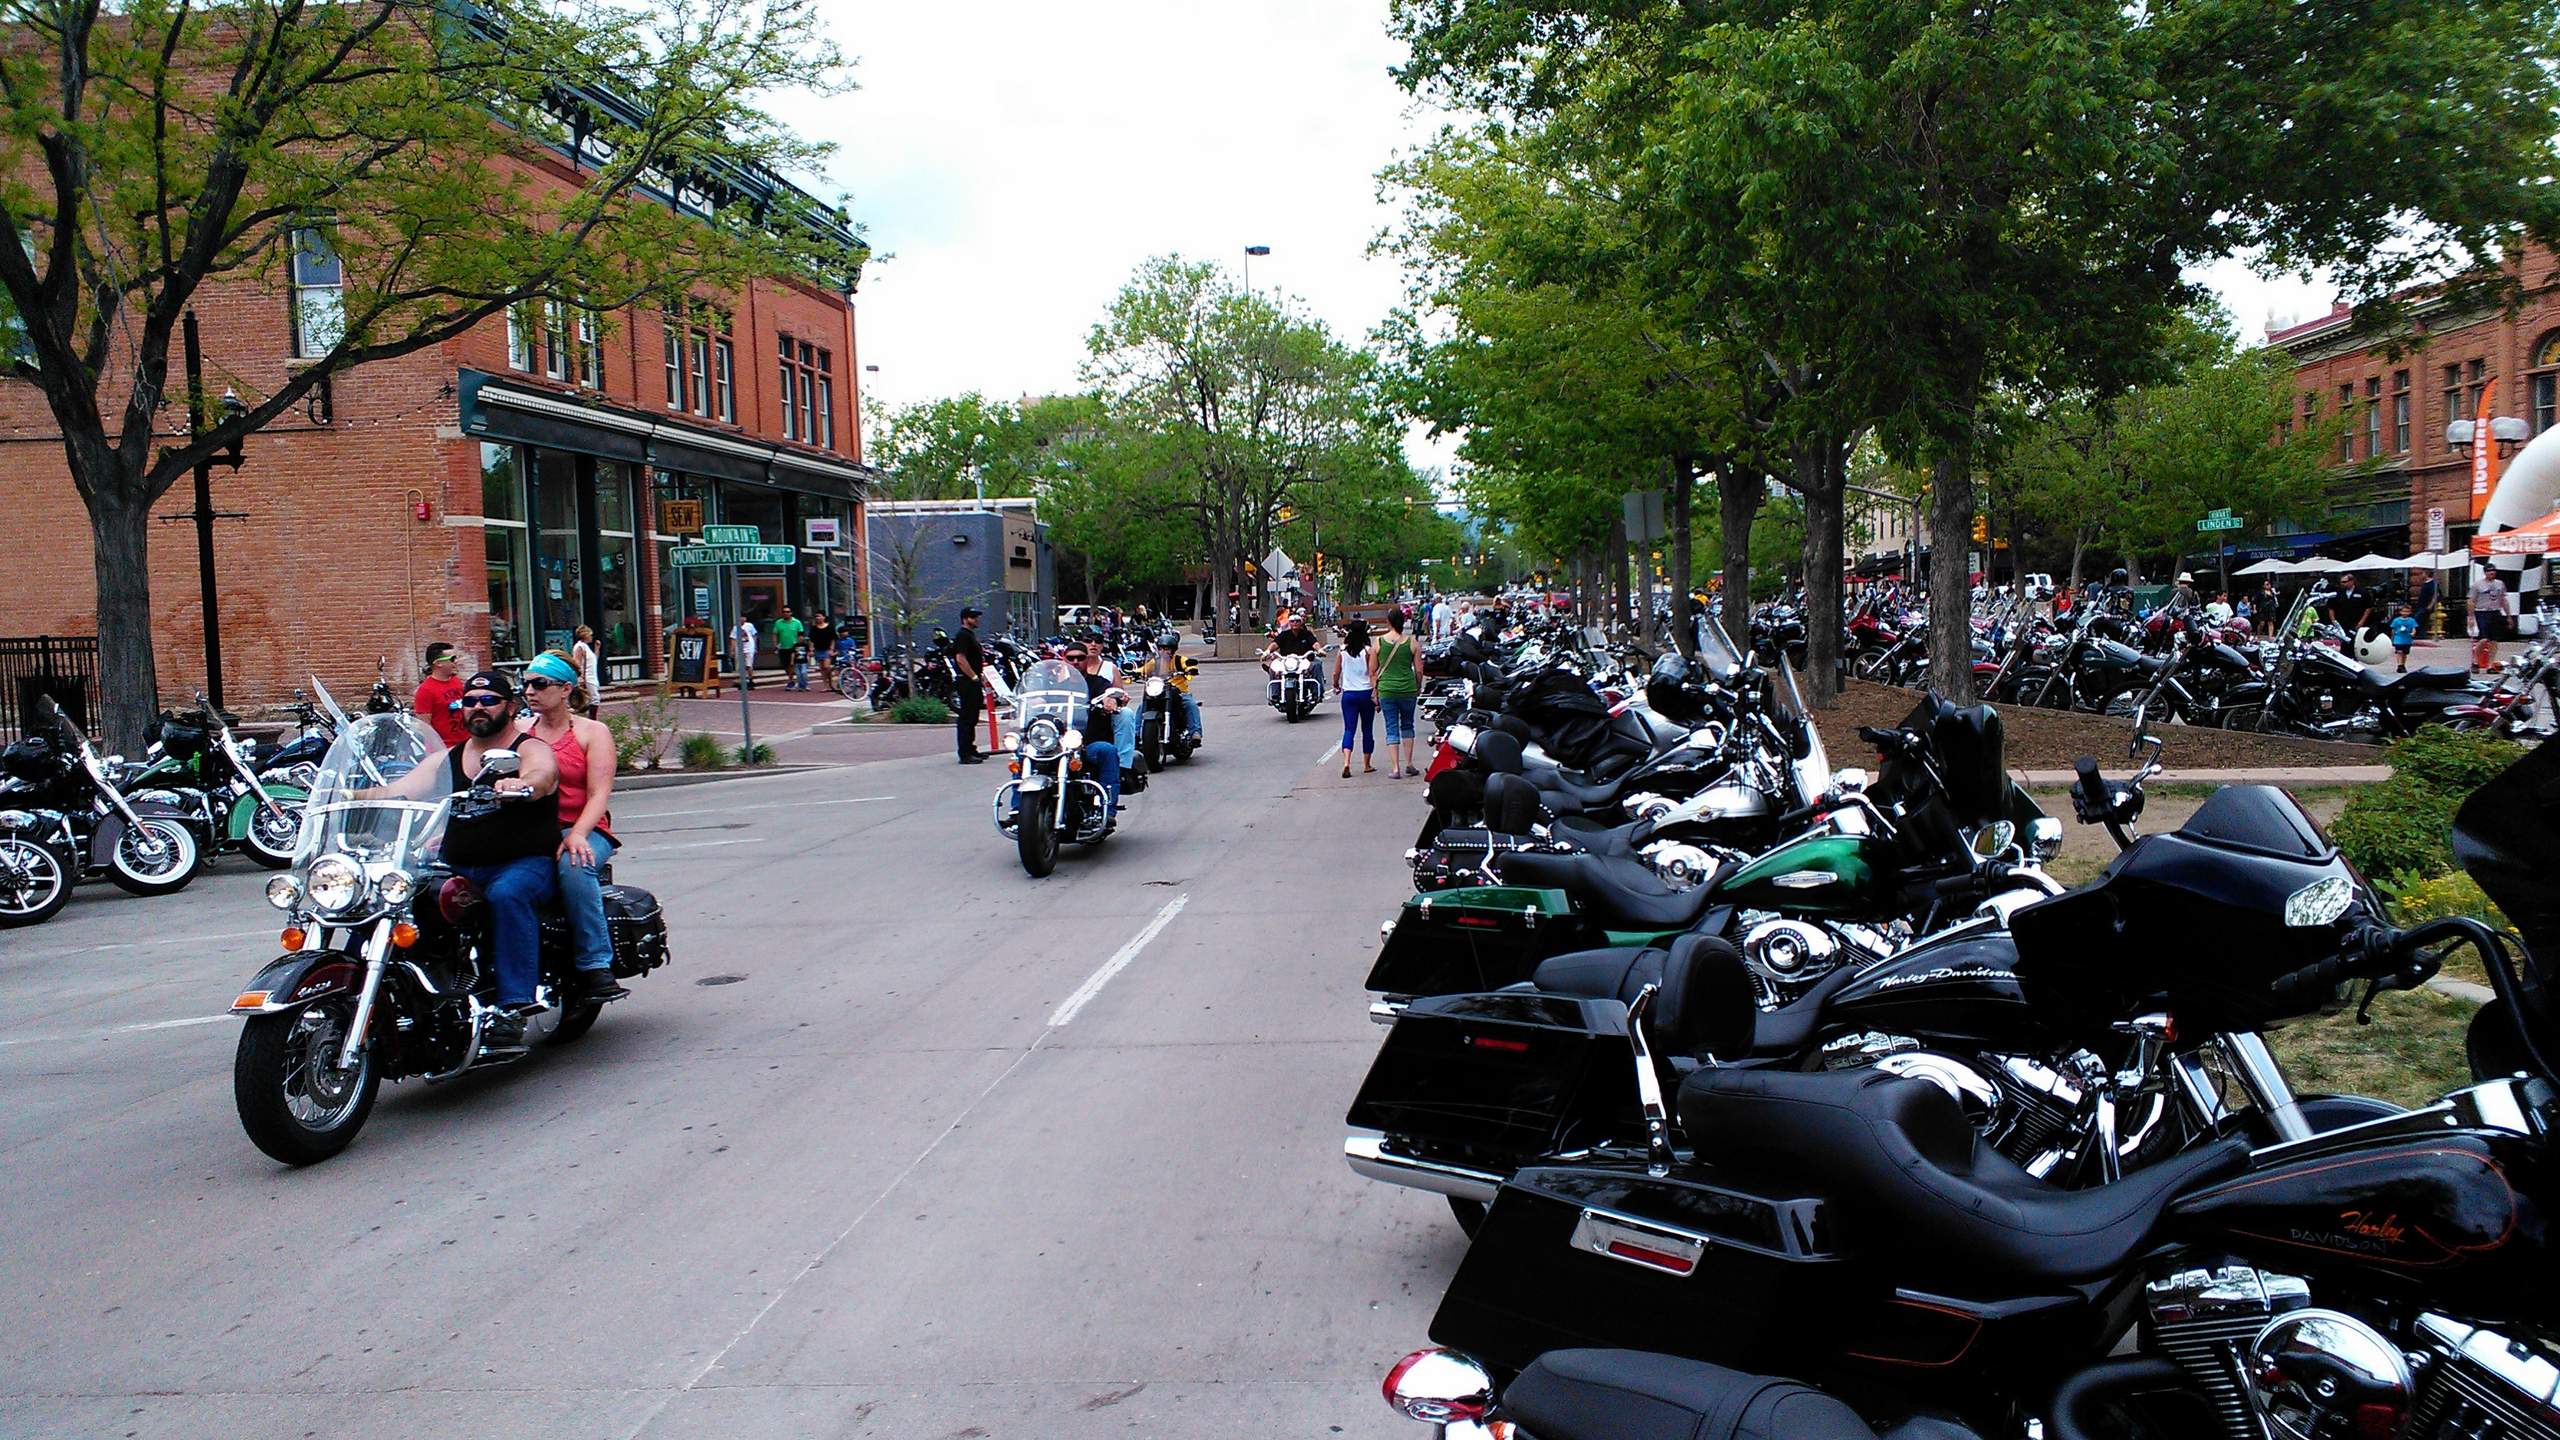 More bikers were coming in as I was admiring the bikes.